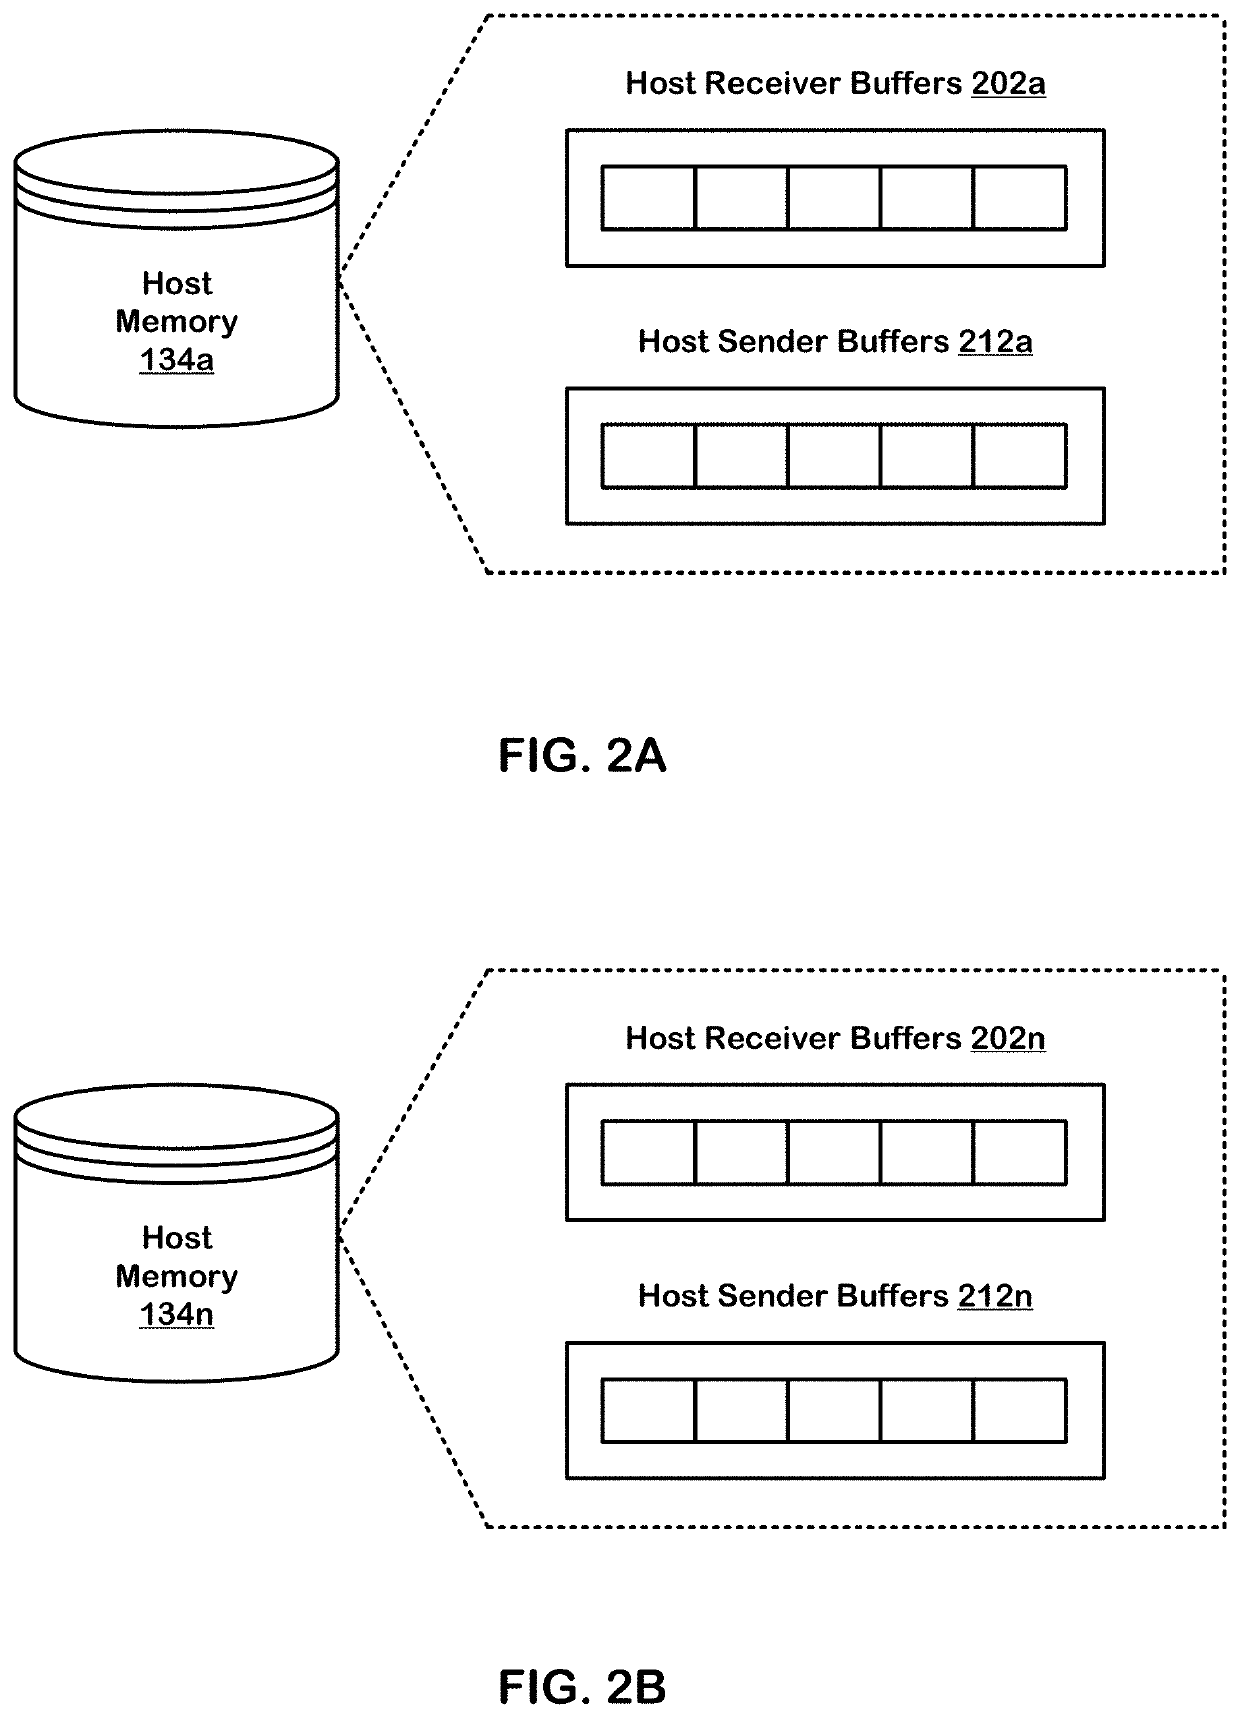 Executing a neural network graph using a non-homogenous set of reconfigurable processors